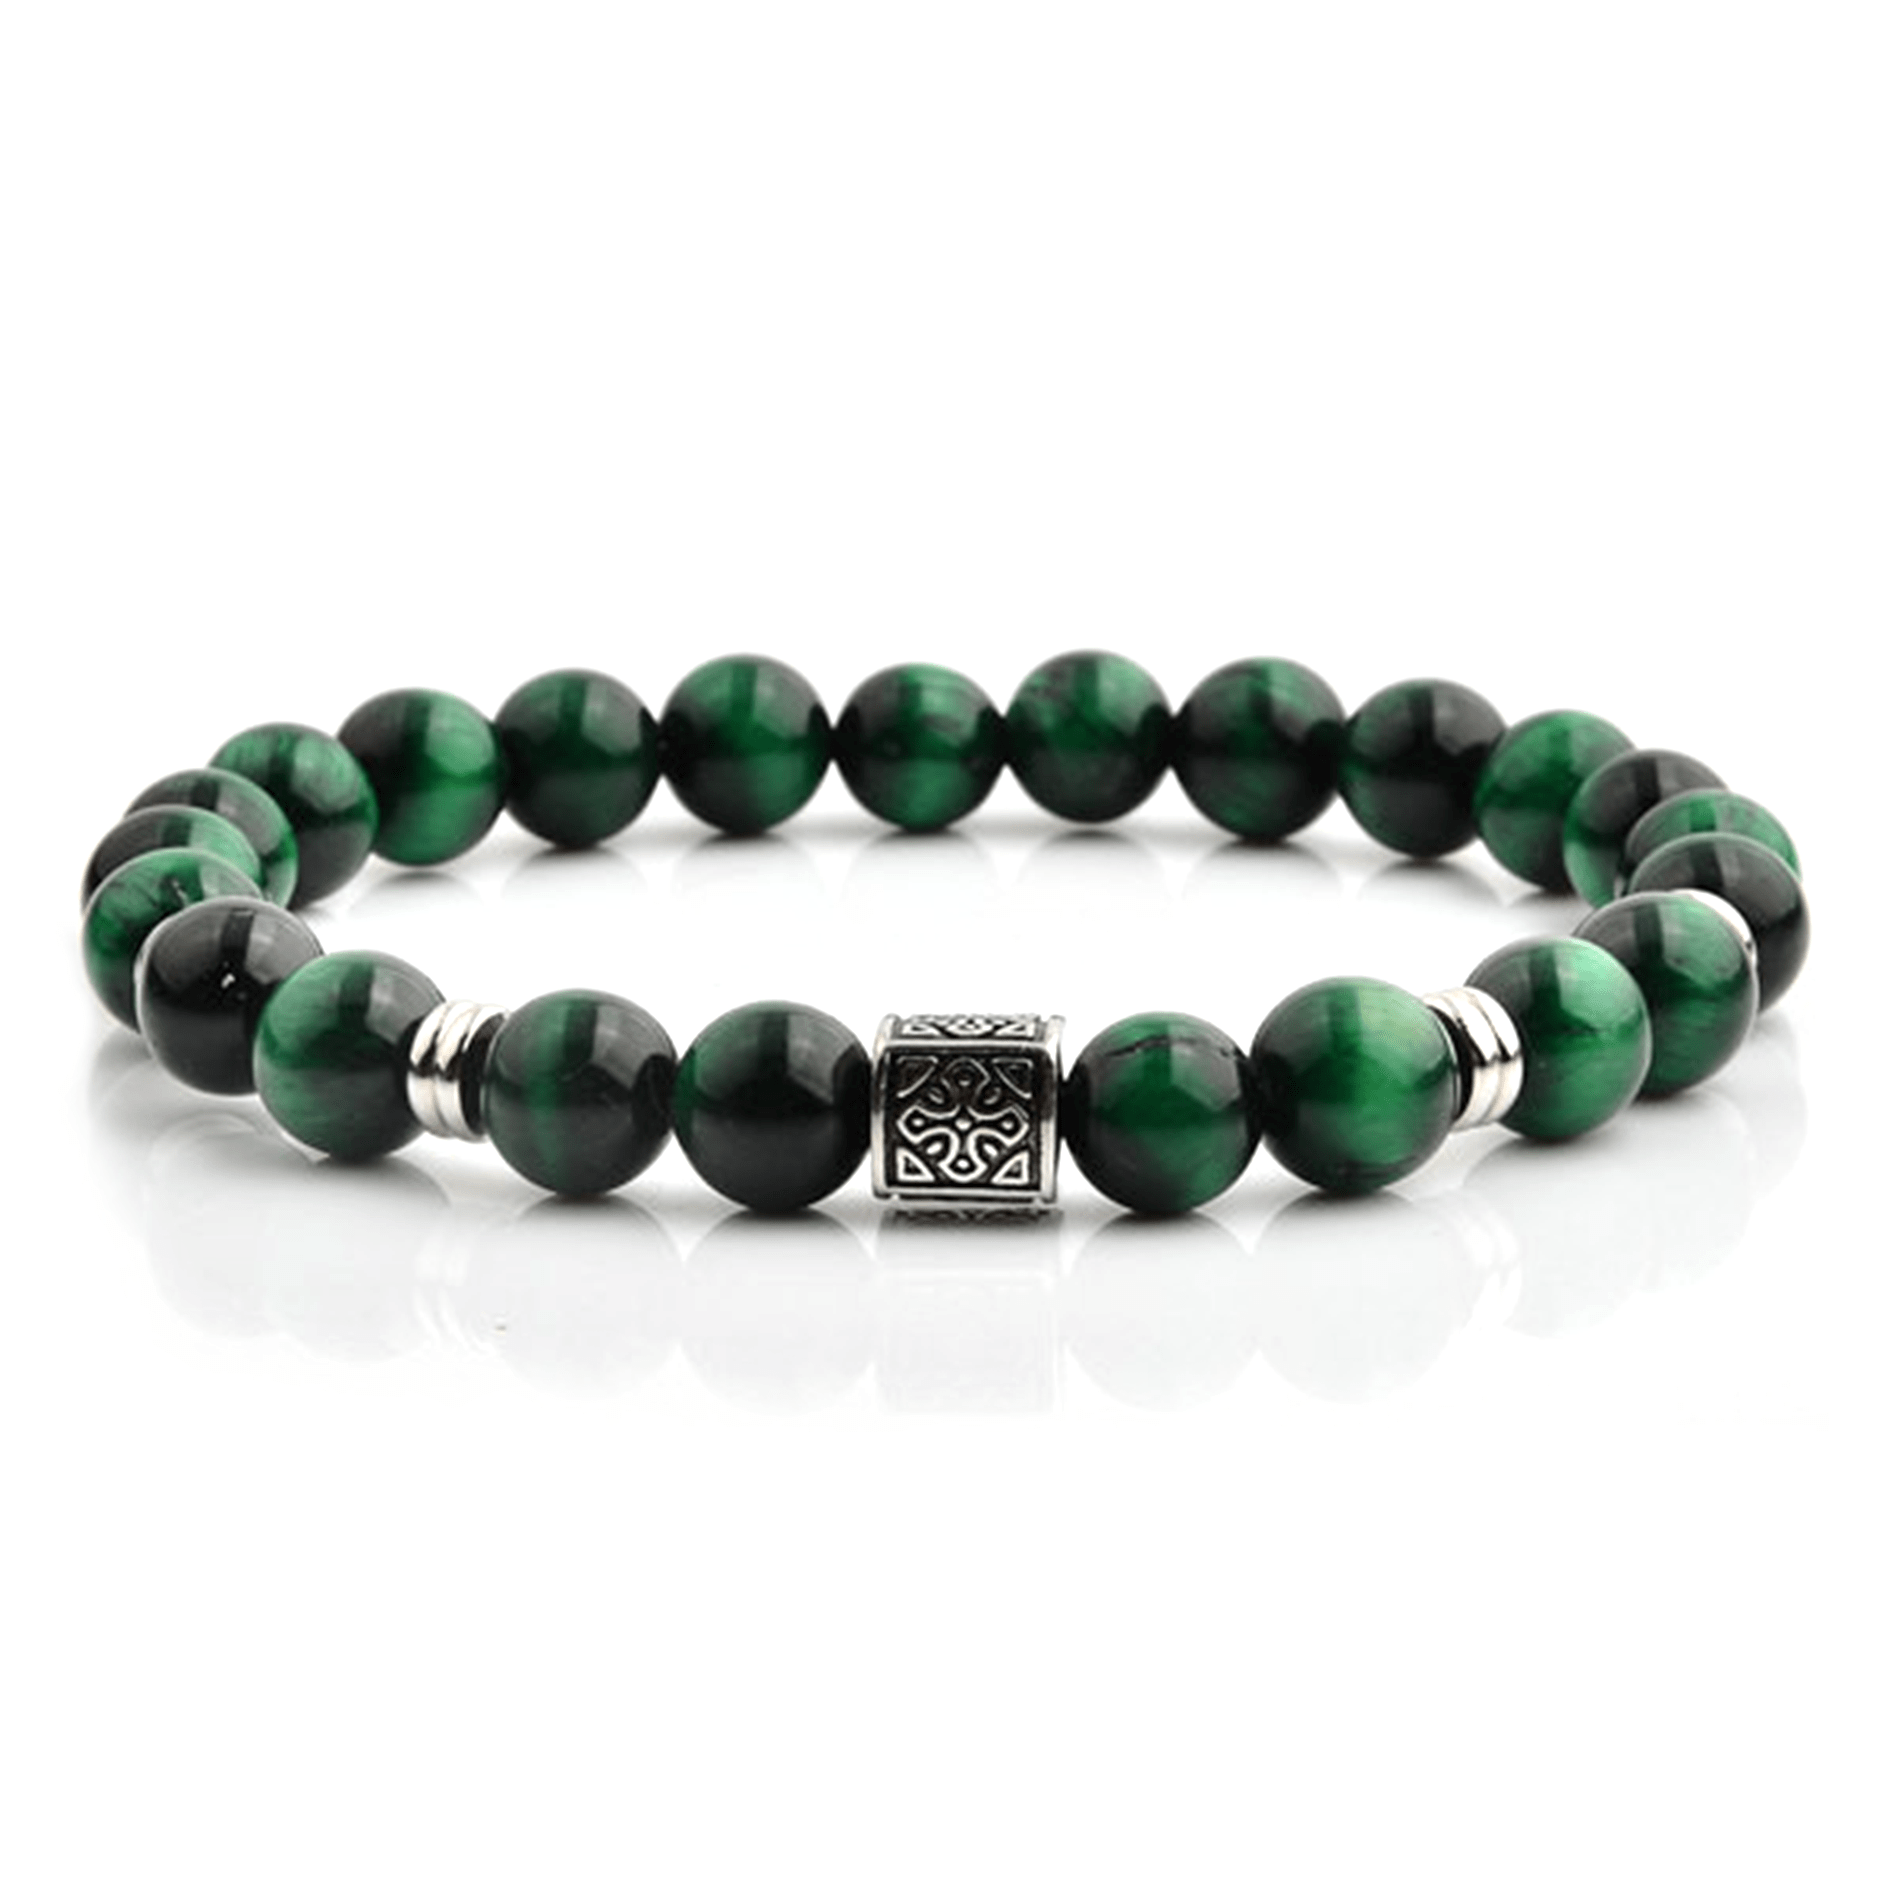 HYLIZO X Series 210 - Green Marble Beaded bracelet with 316 Stainless Steel Luxury Engraving